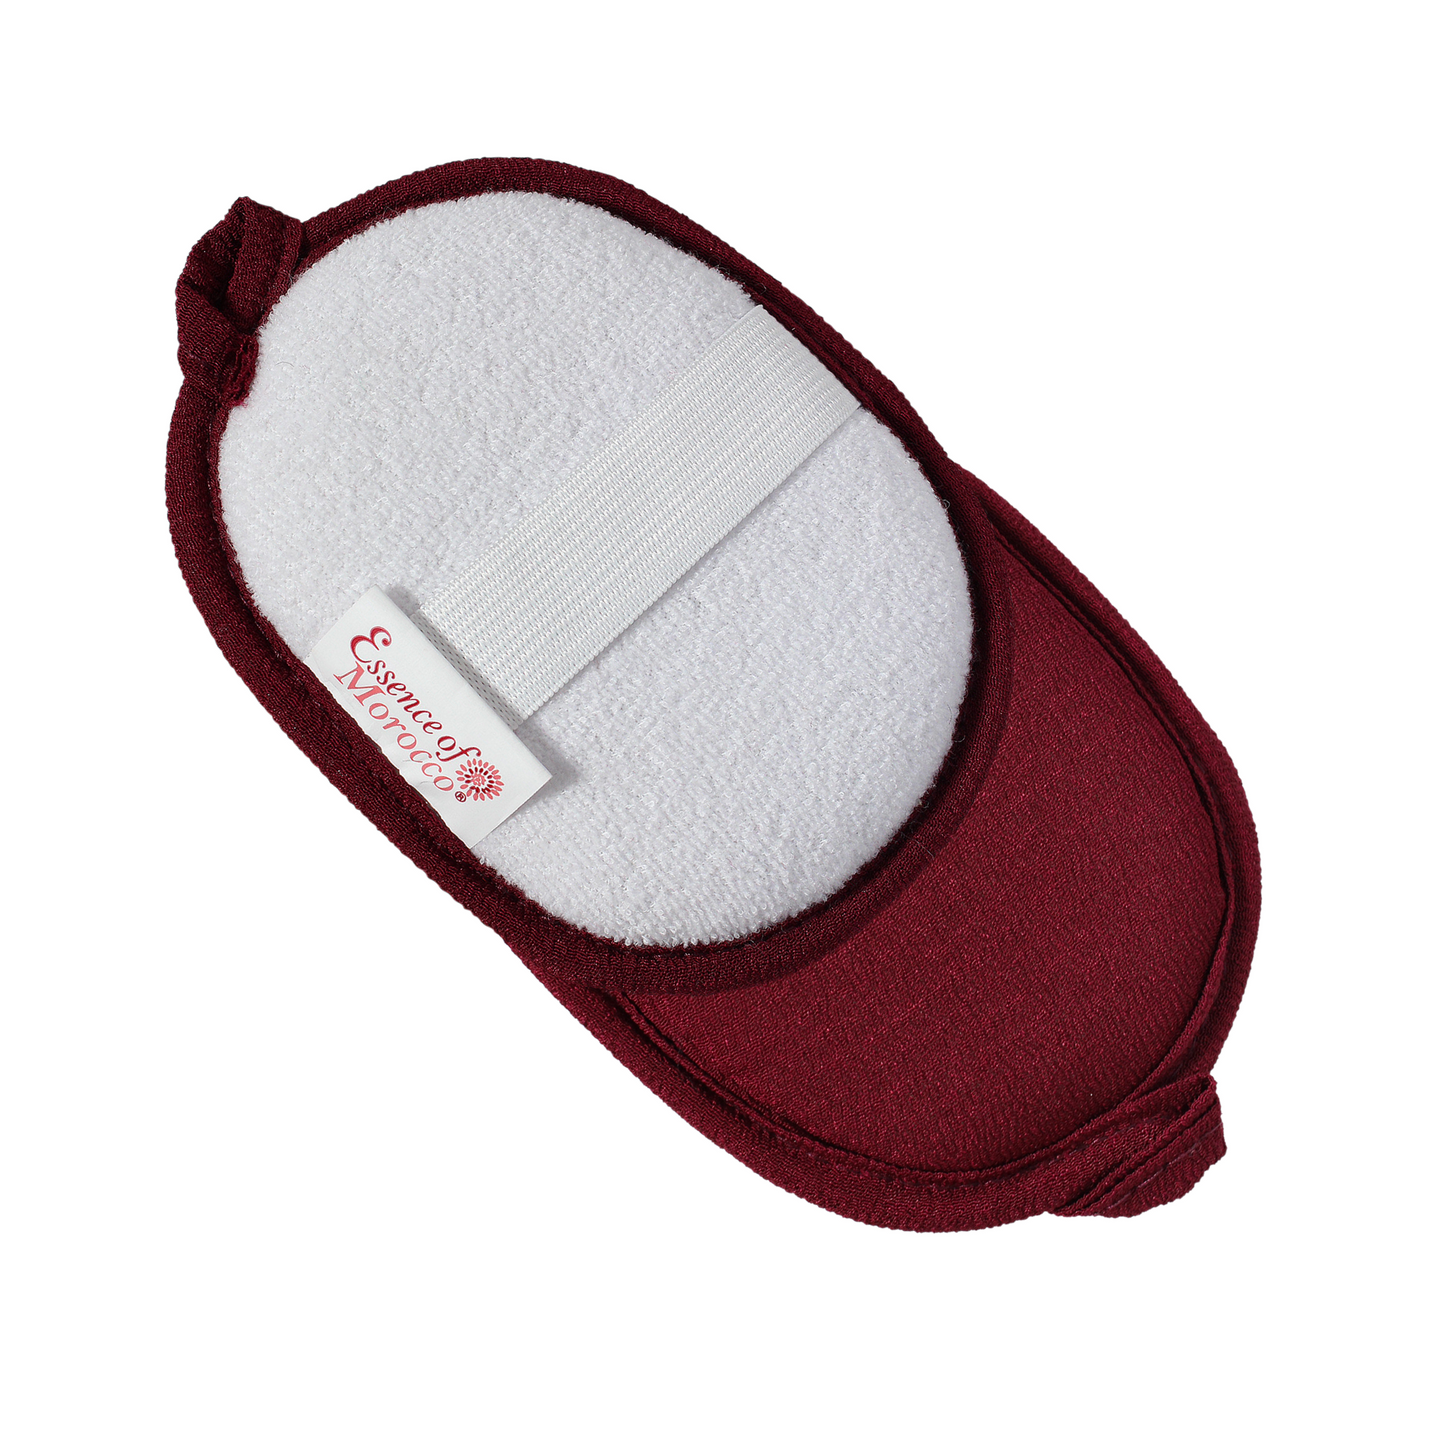 Moroccan Exfoliating Cleansing Kessa Facial Pad Reversible Dual Use as a Cleanser and Exfoliator